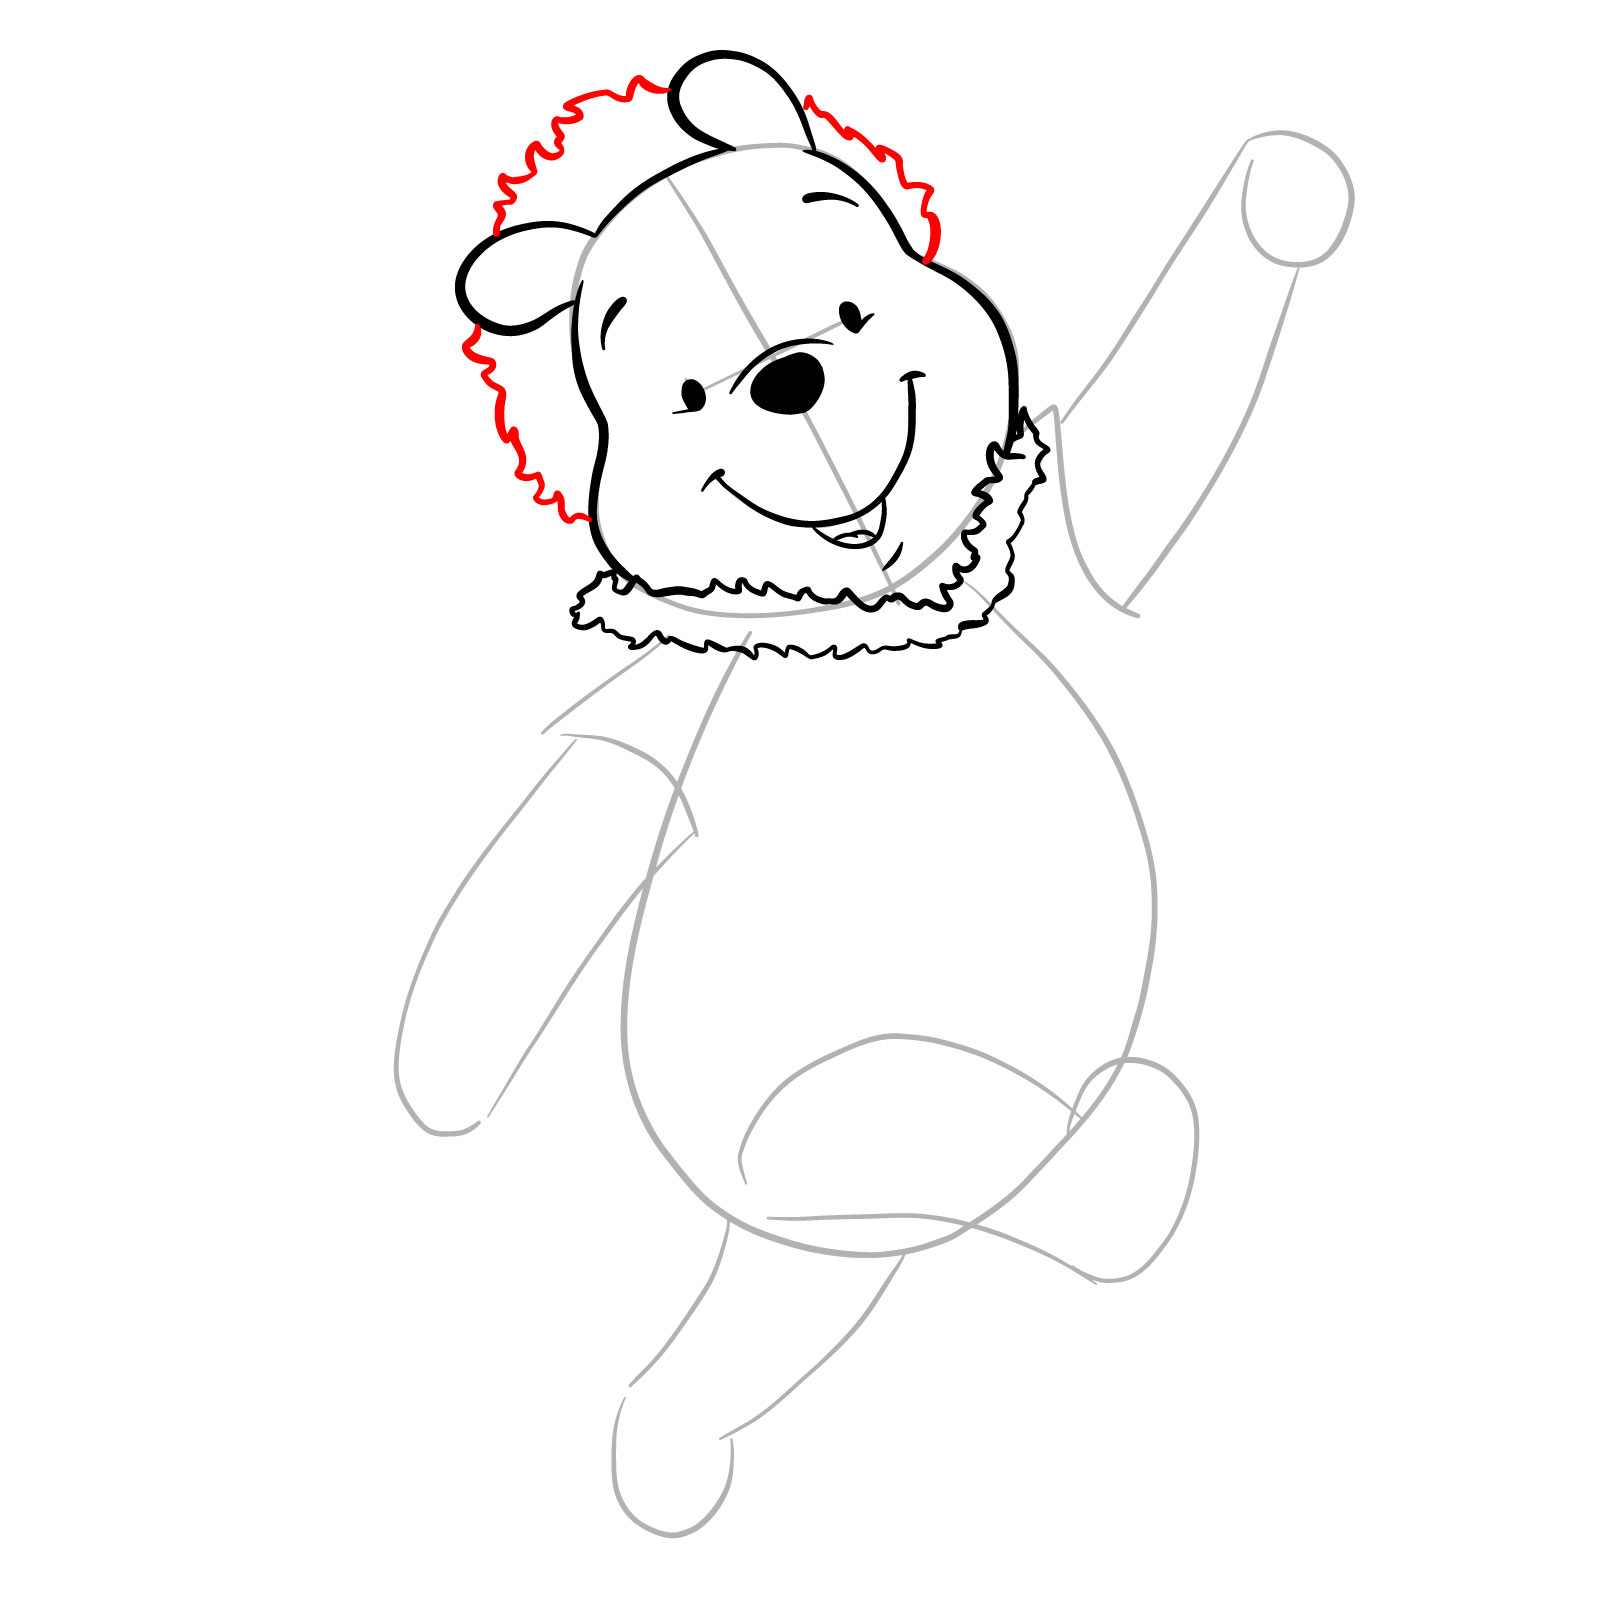 How to draw Winnie-the-Pooh Christmas style - step 12